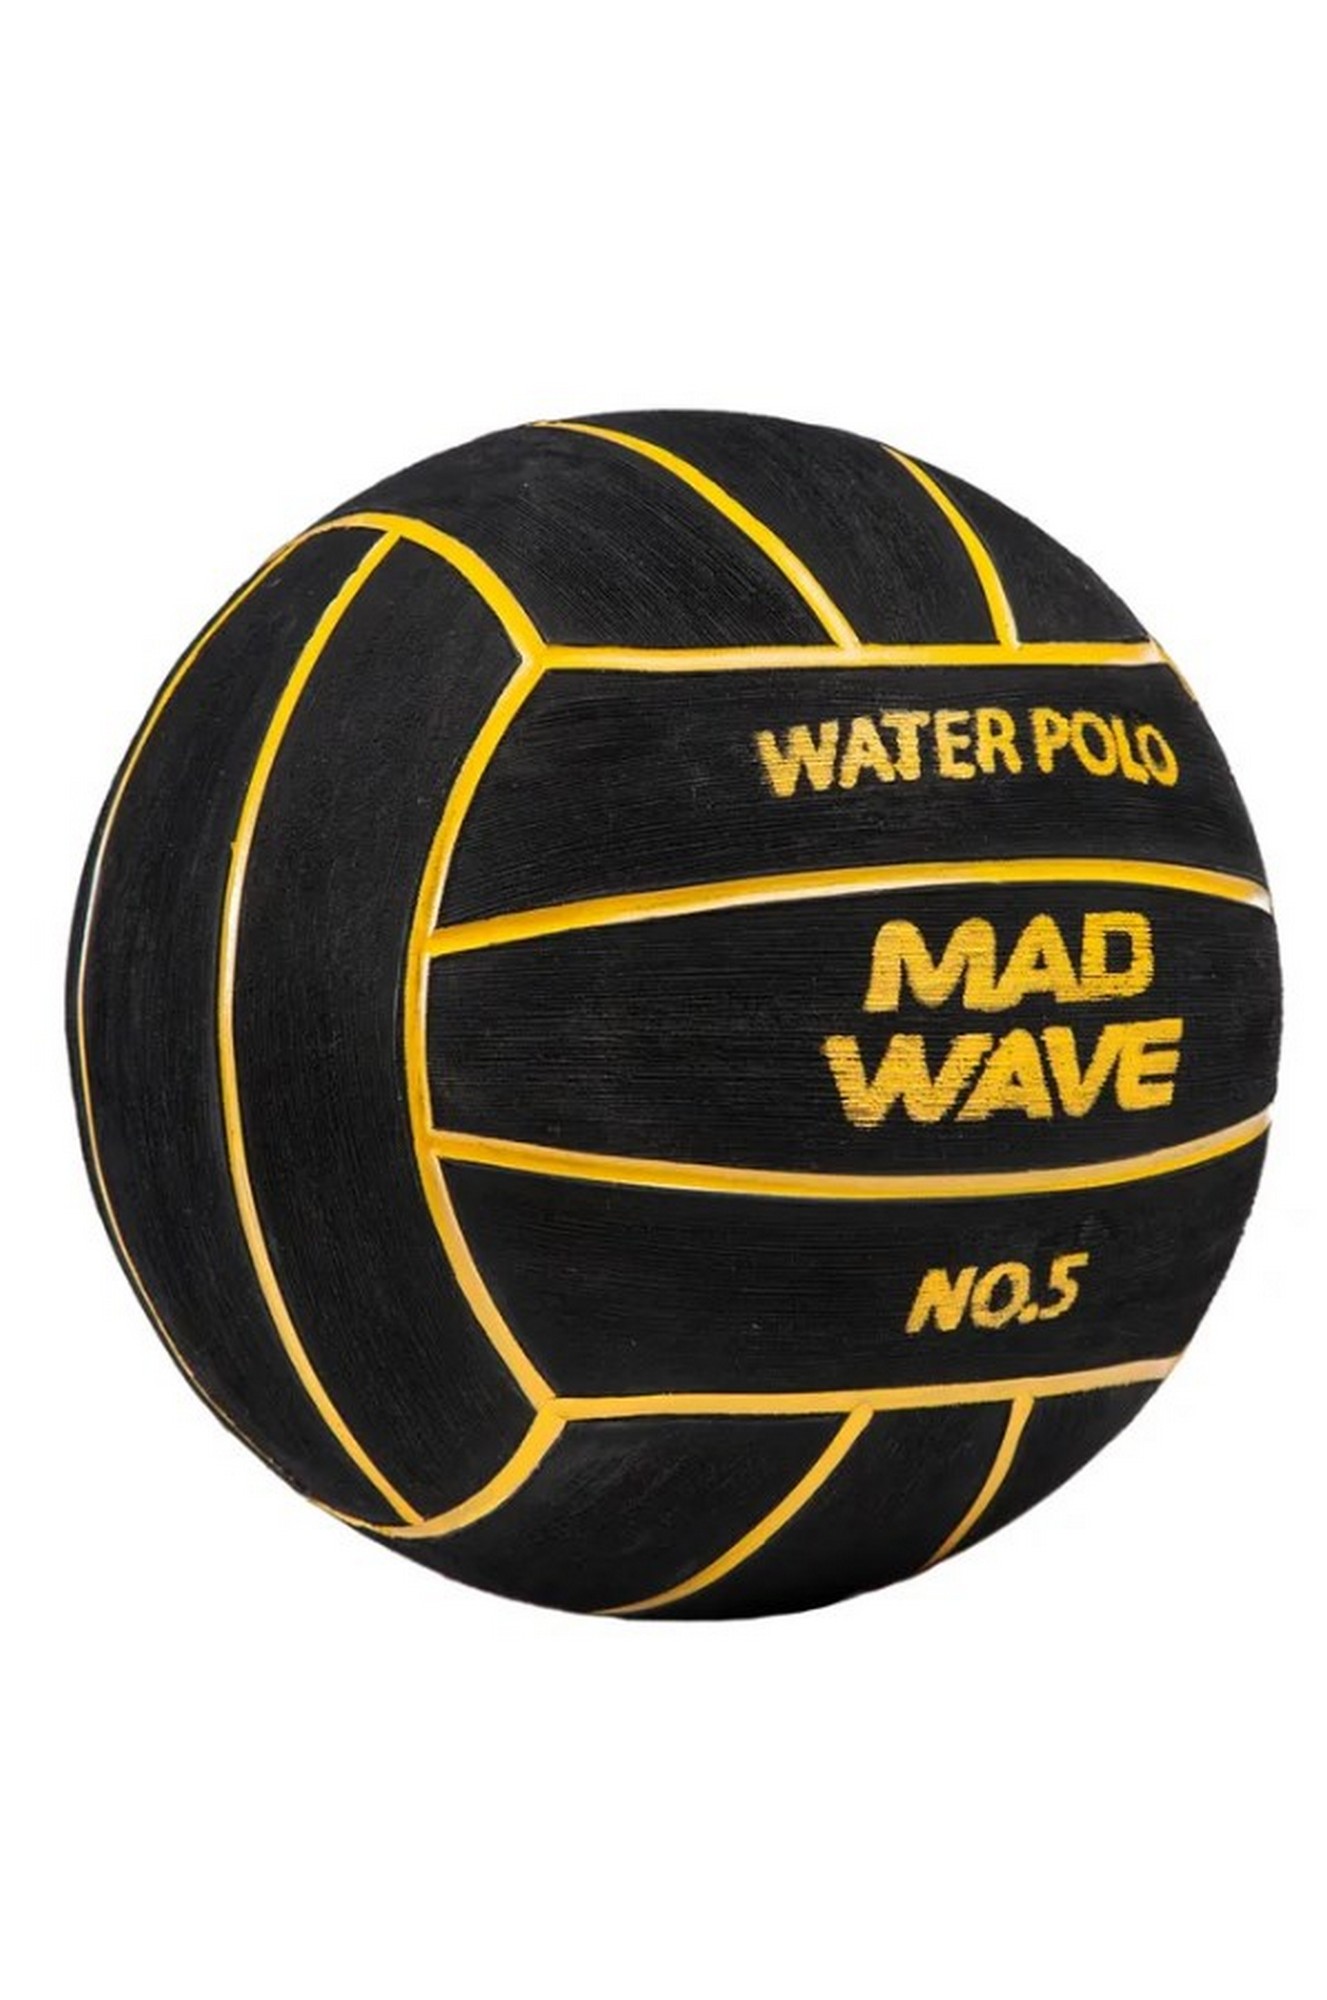     Mad Wave WP Official #5 M2230 01 5 01W